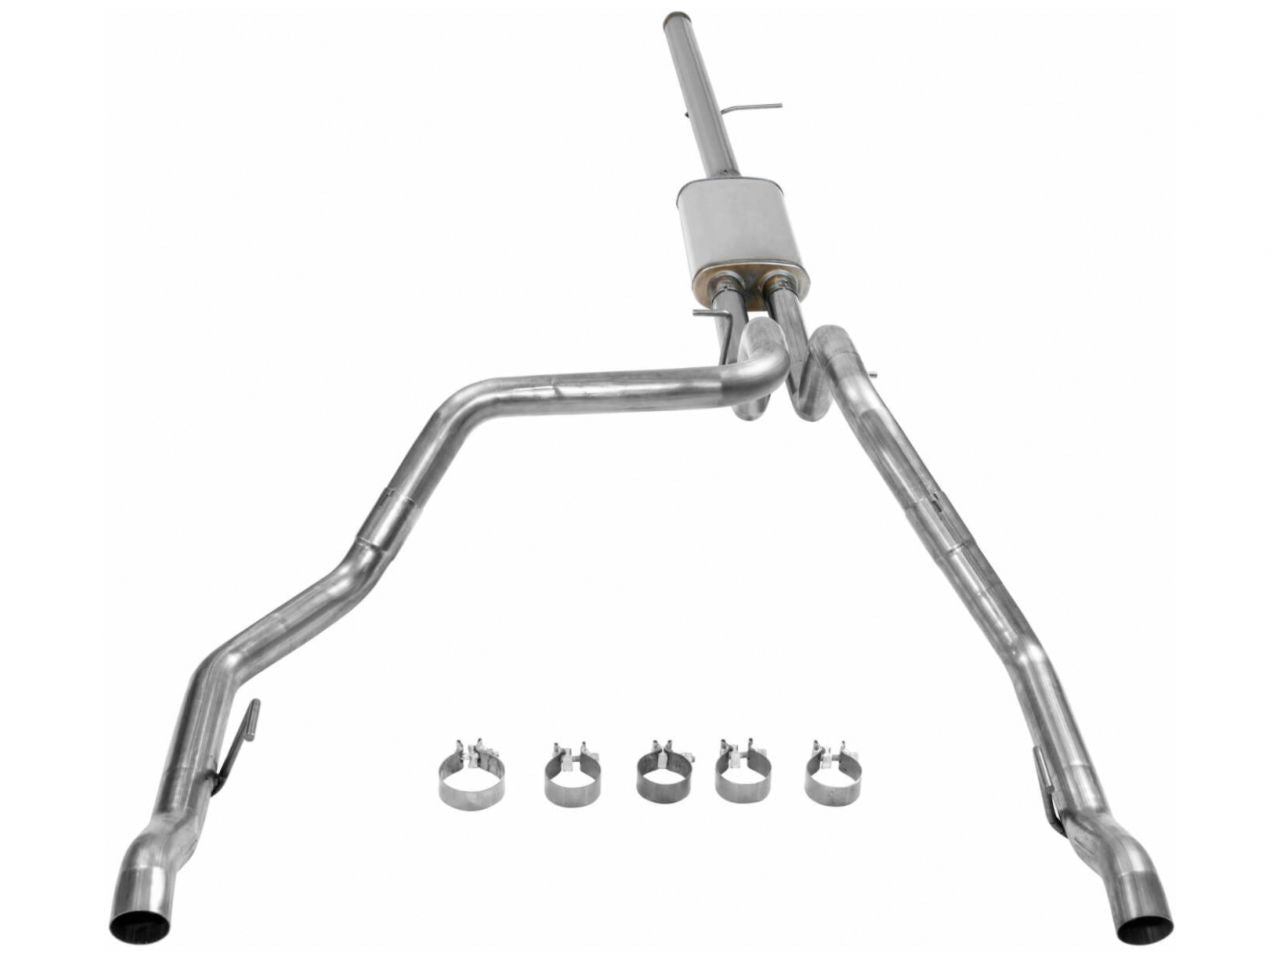 Flowmaster FlowFX Cat-Back Exhaust System Fits 2019 GM Silverado And Sierrra